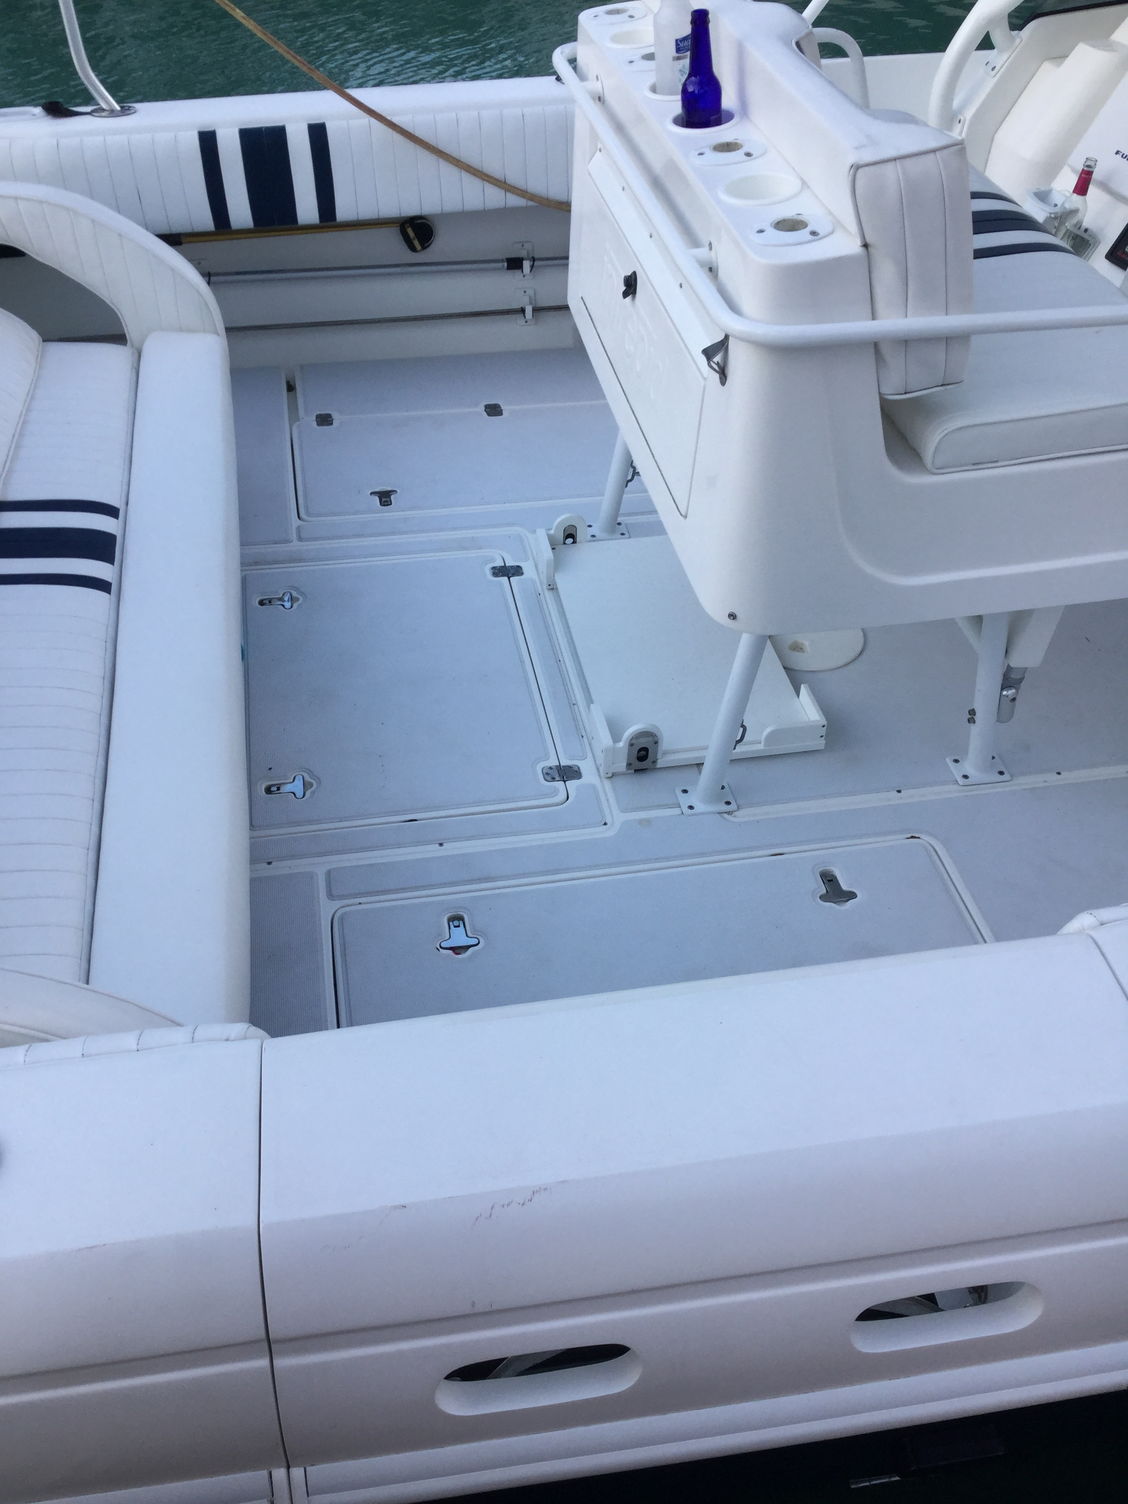 Attaching a cooler so it doesn't slide around? - The Hull Truth